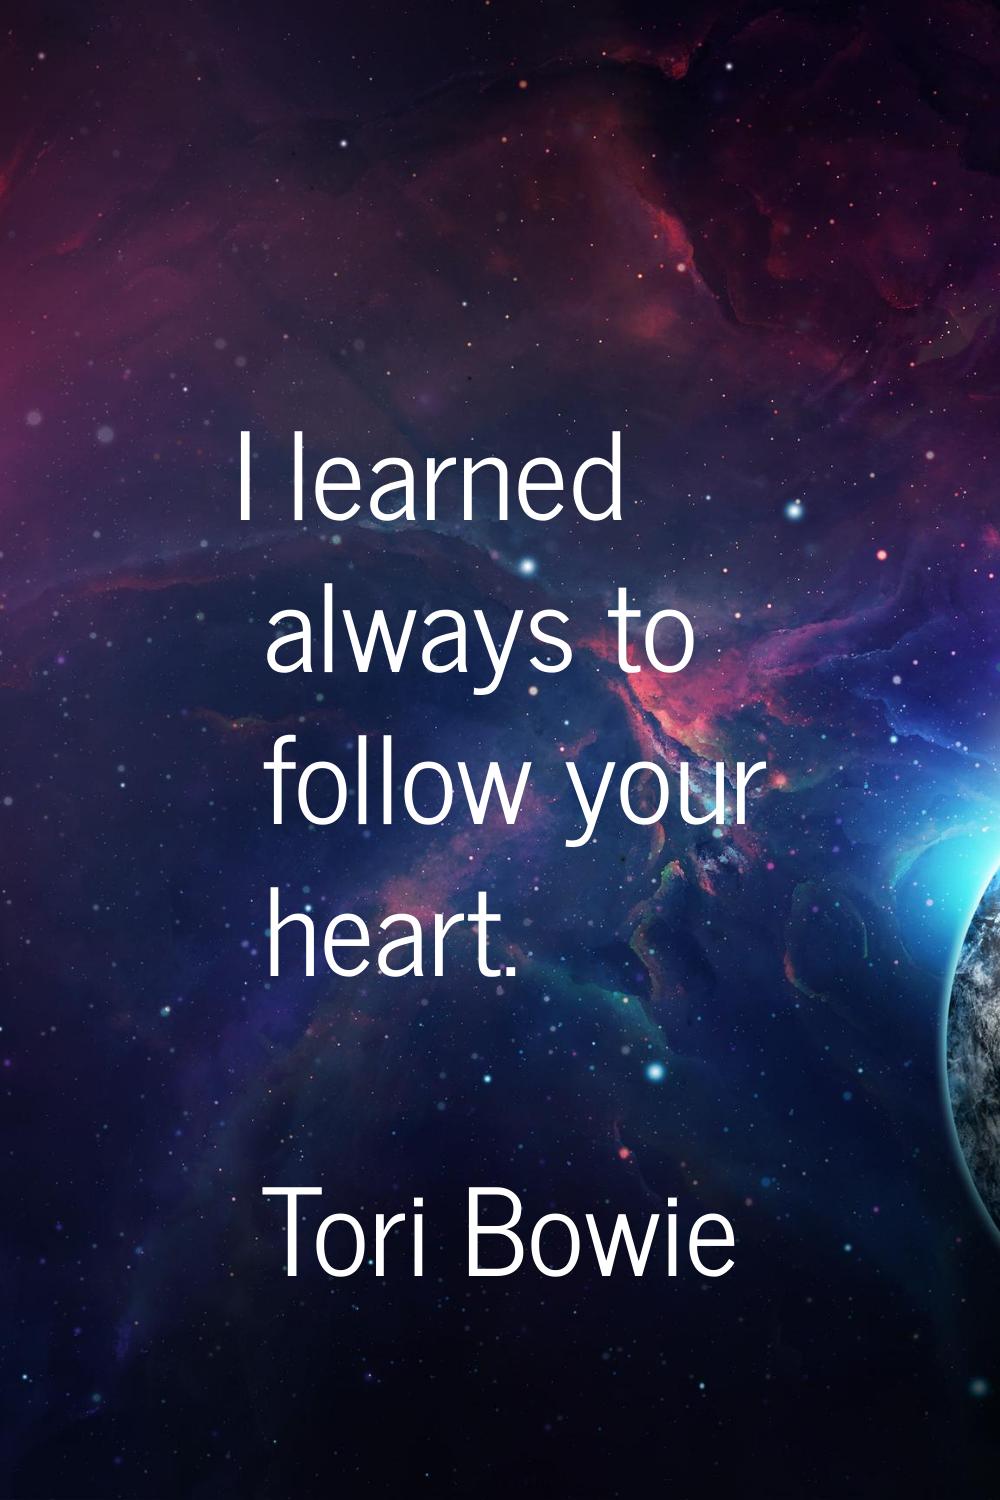 I learned always to follow your heart.